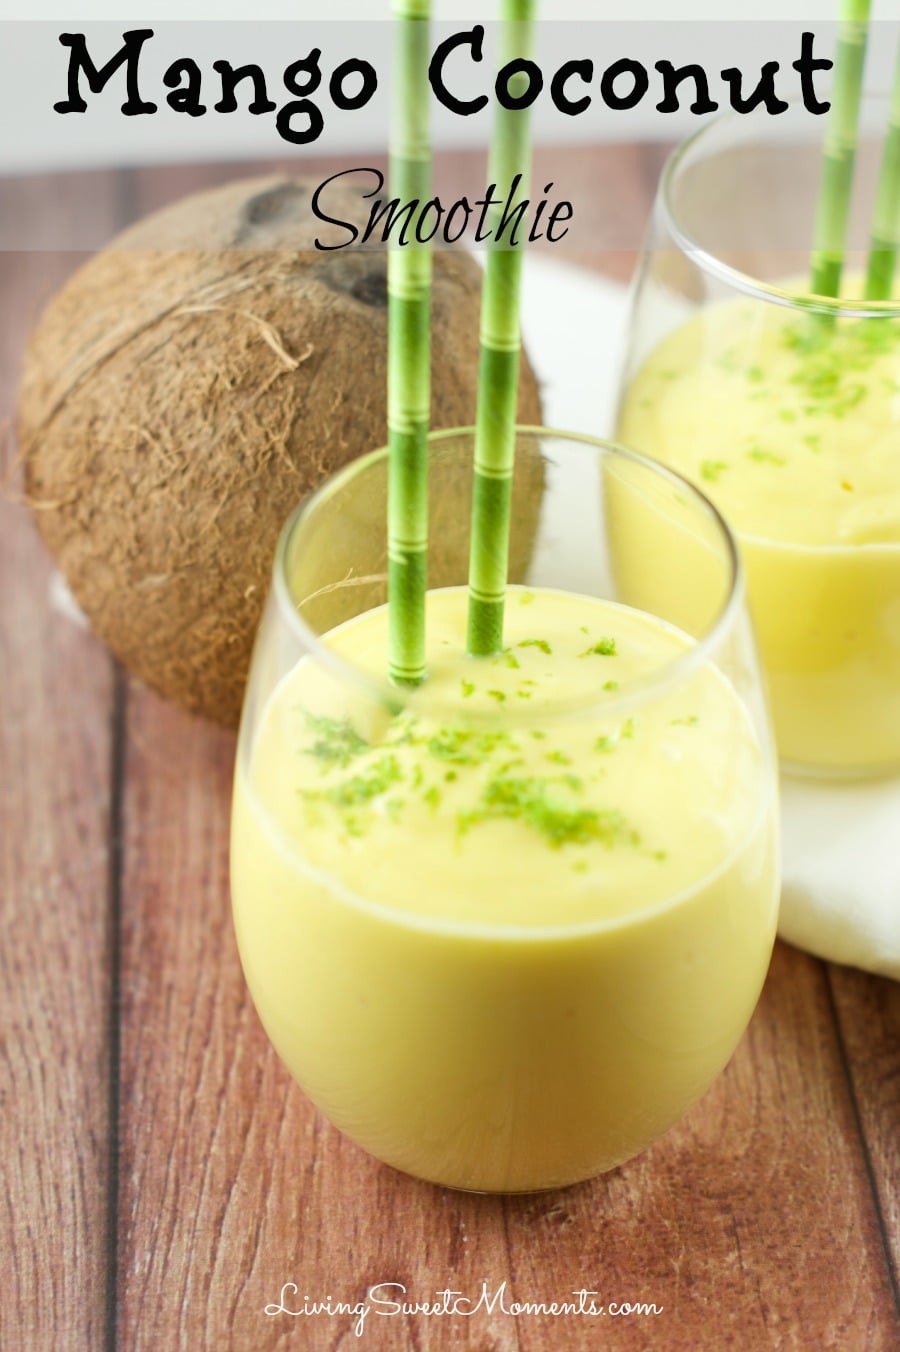 Mango Coconut Smoothie - Delicious 3 ingredient smoothie. Enjoy tropical flavors in a decadent thick smoothie that takes just seconds to make. Perfect breakfast or afternoon snack. 